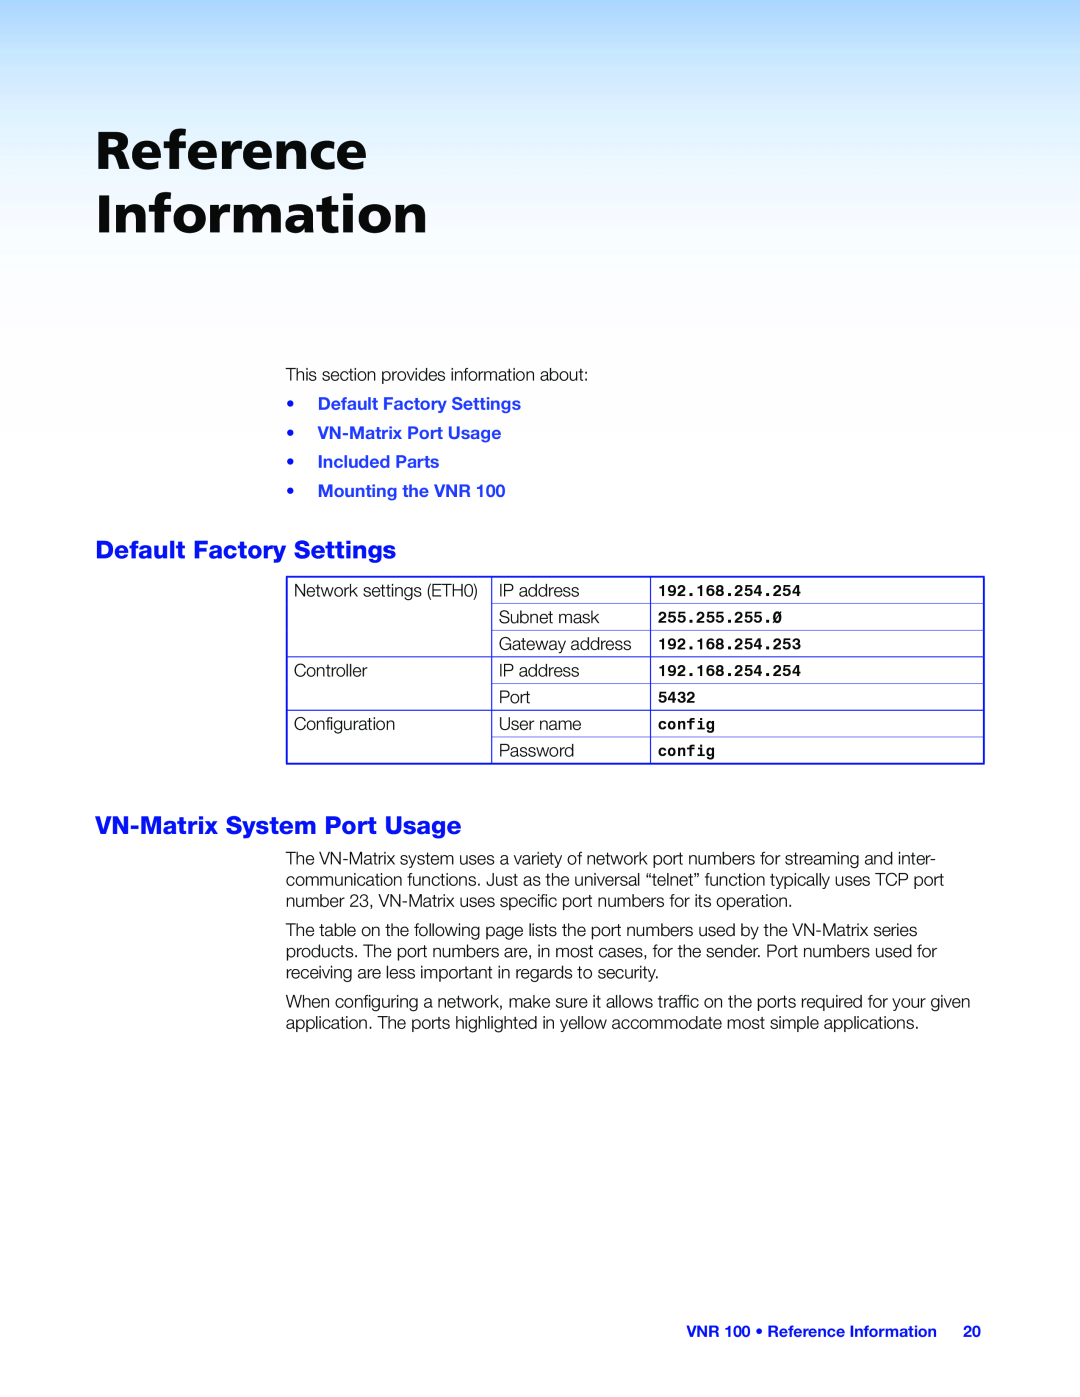 Extron electronic VNR 100 manual Reference Information, Default Factory Settings, VN-MatrixSystem Port Usage 